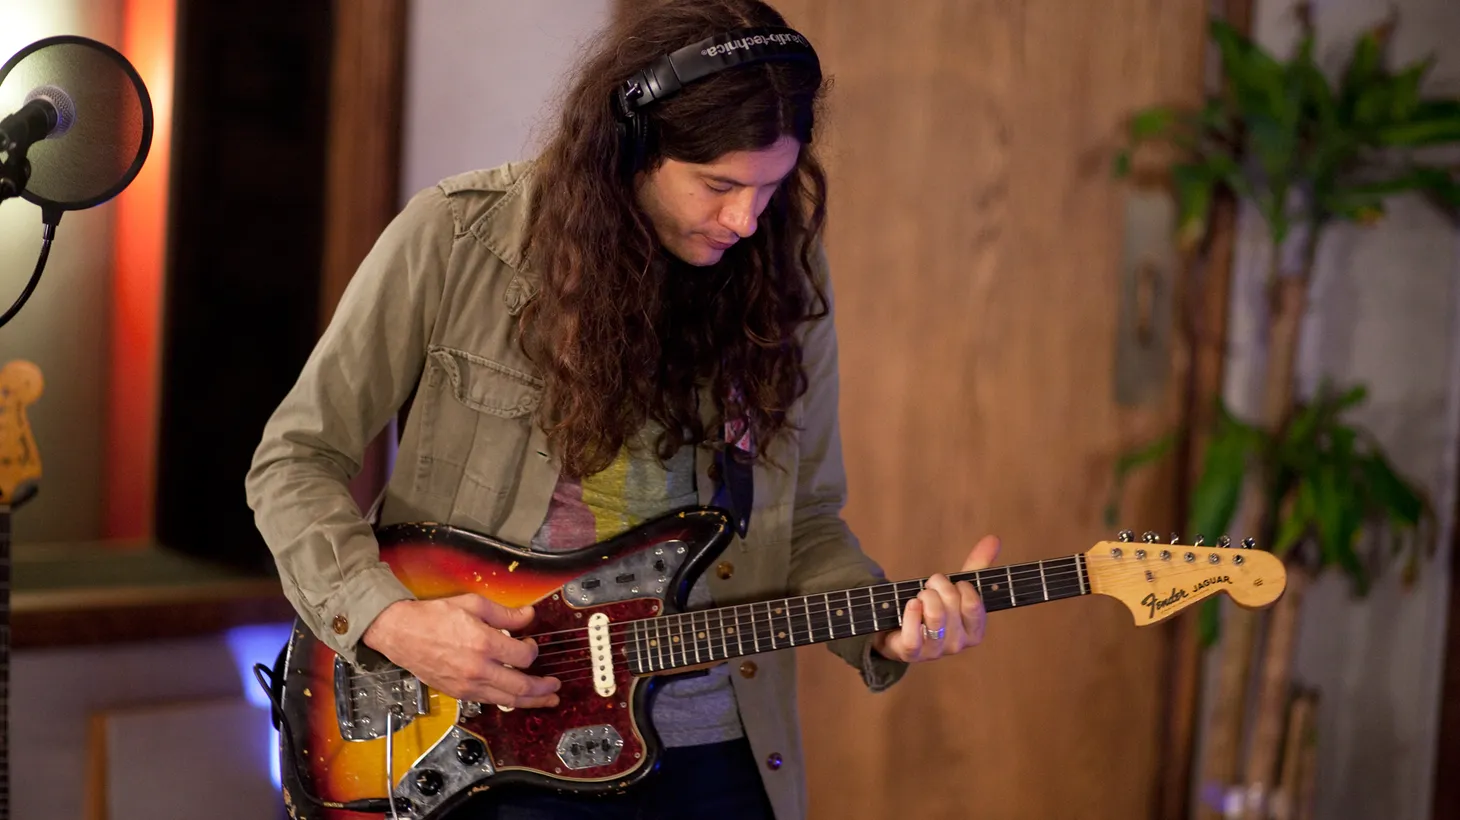 Kurt Vile made his MBE debut on the release day for his album, b'lieve i'm goin down, which was recorded in Los Angeles and Joshua Tree, among other locations.